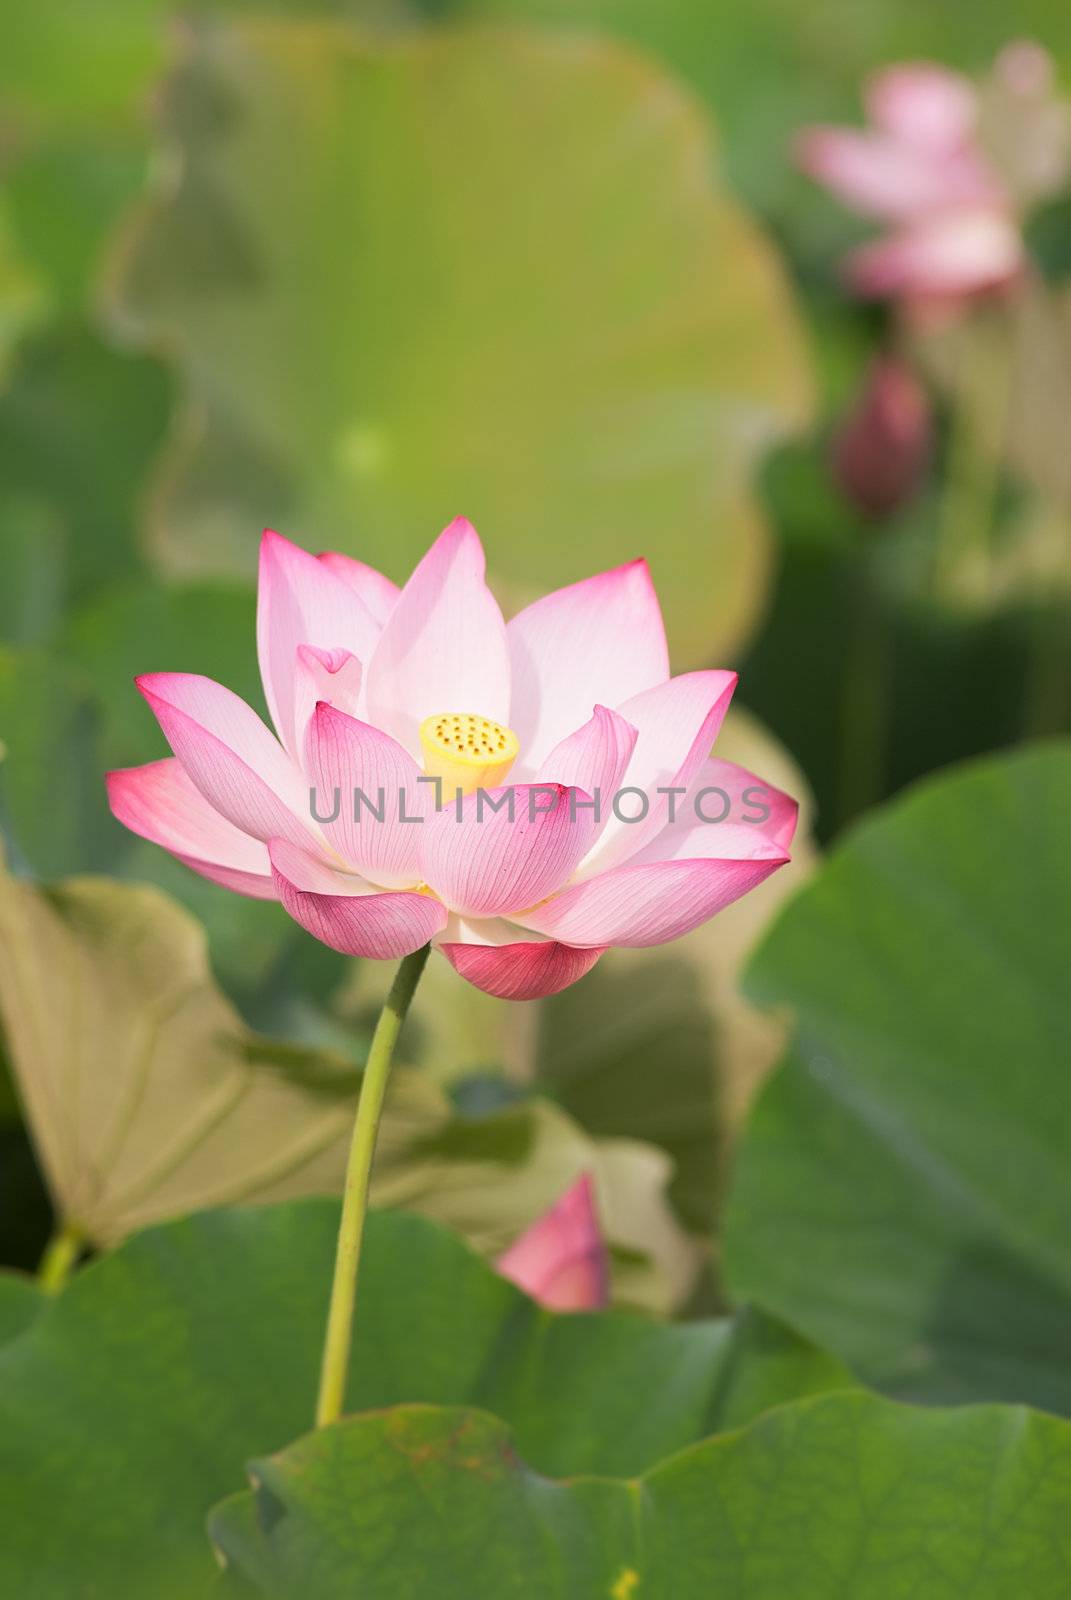 Lotus flower, landscape of nature flora in outdoor with pink and green color in summer.